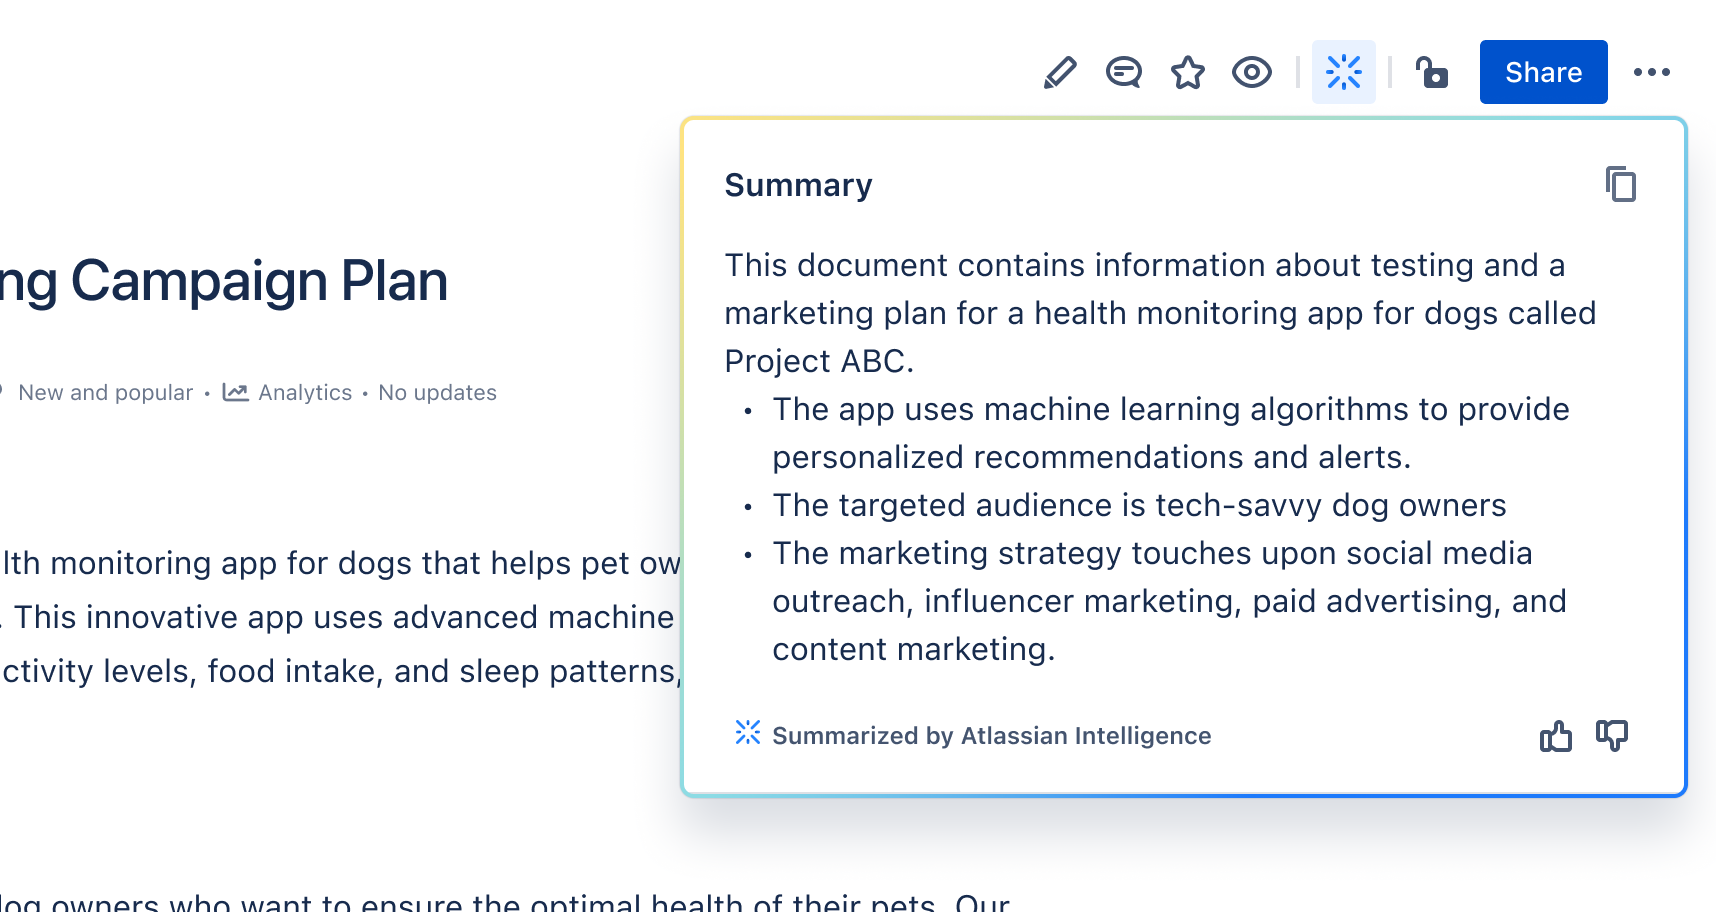 An example of the Atlassian Intelligence icon in the toolbar in Confluence